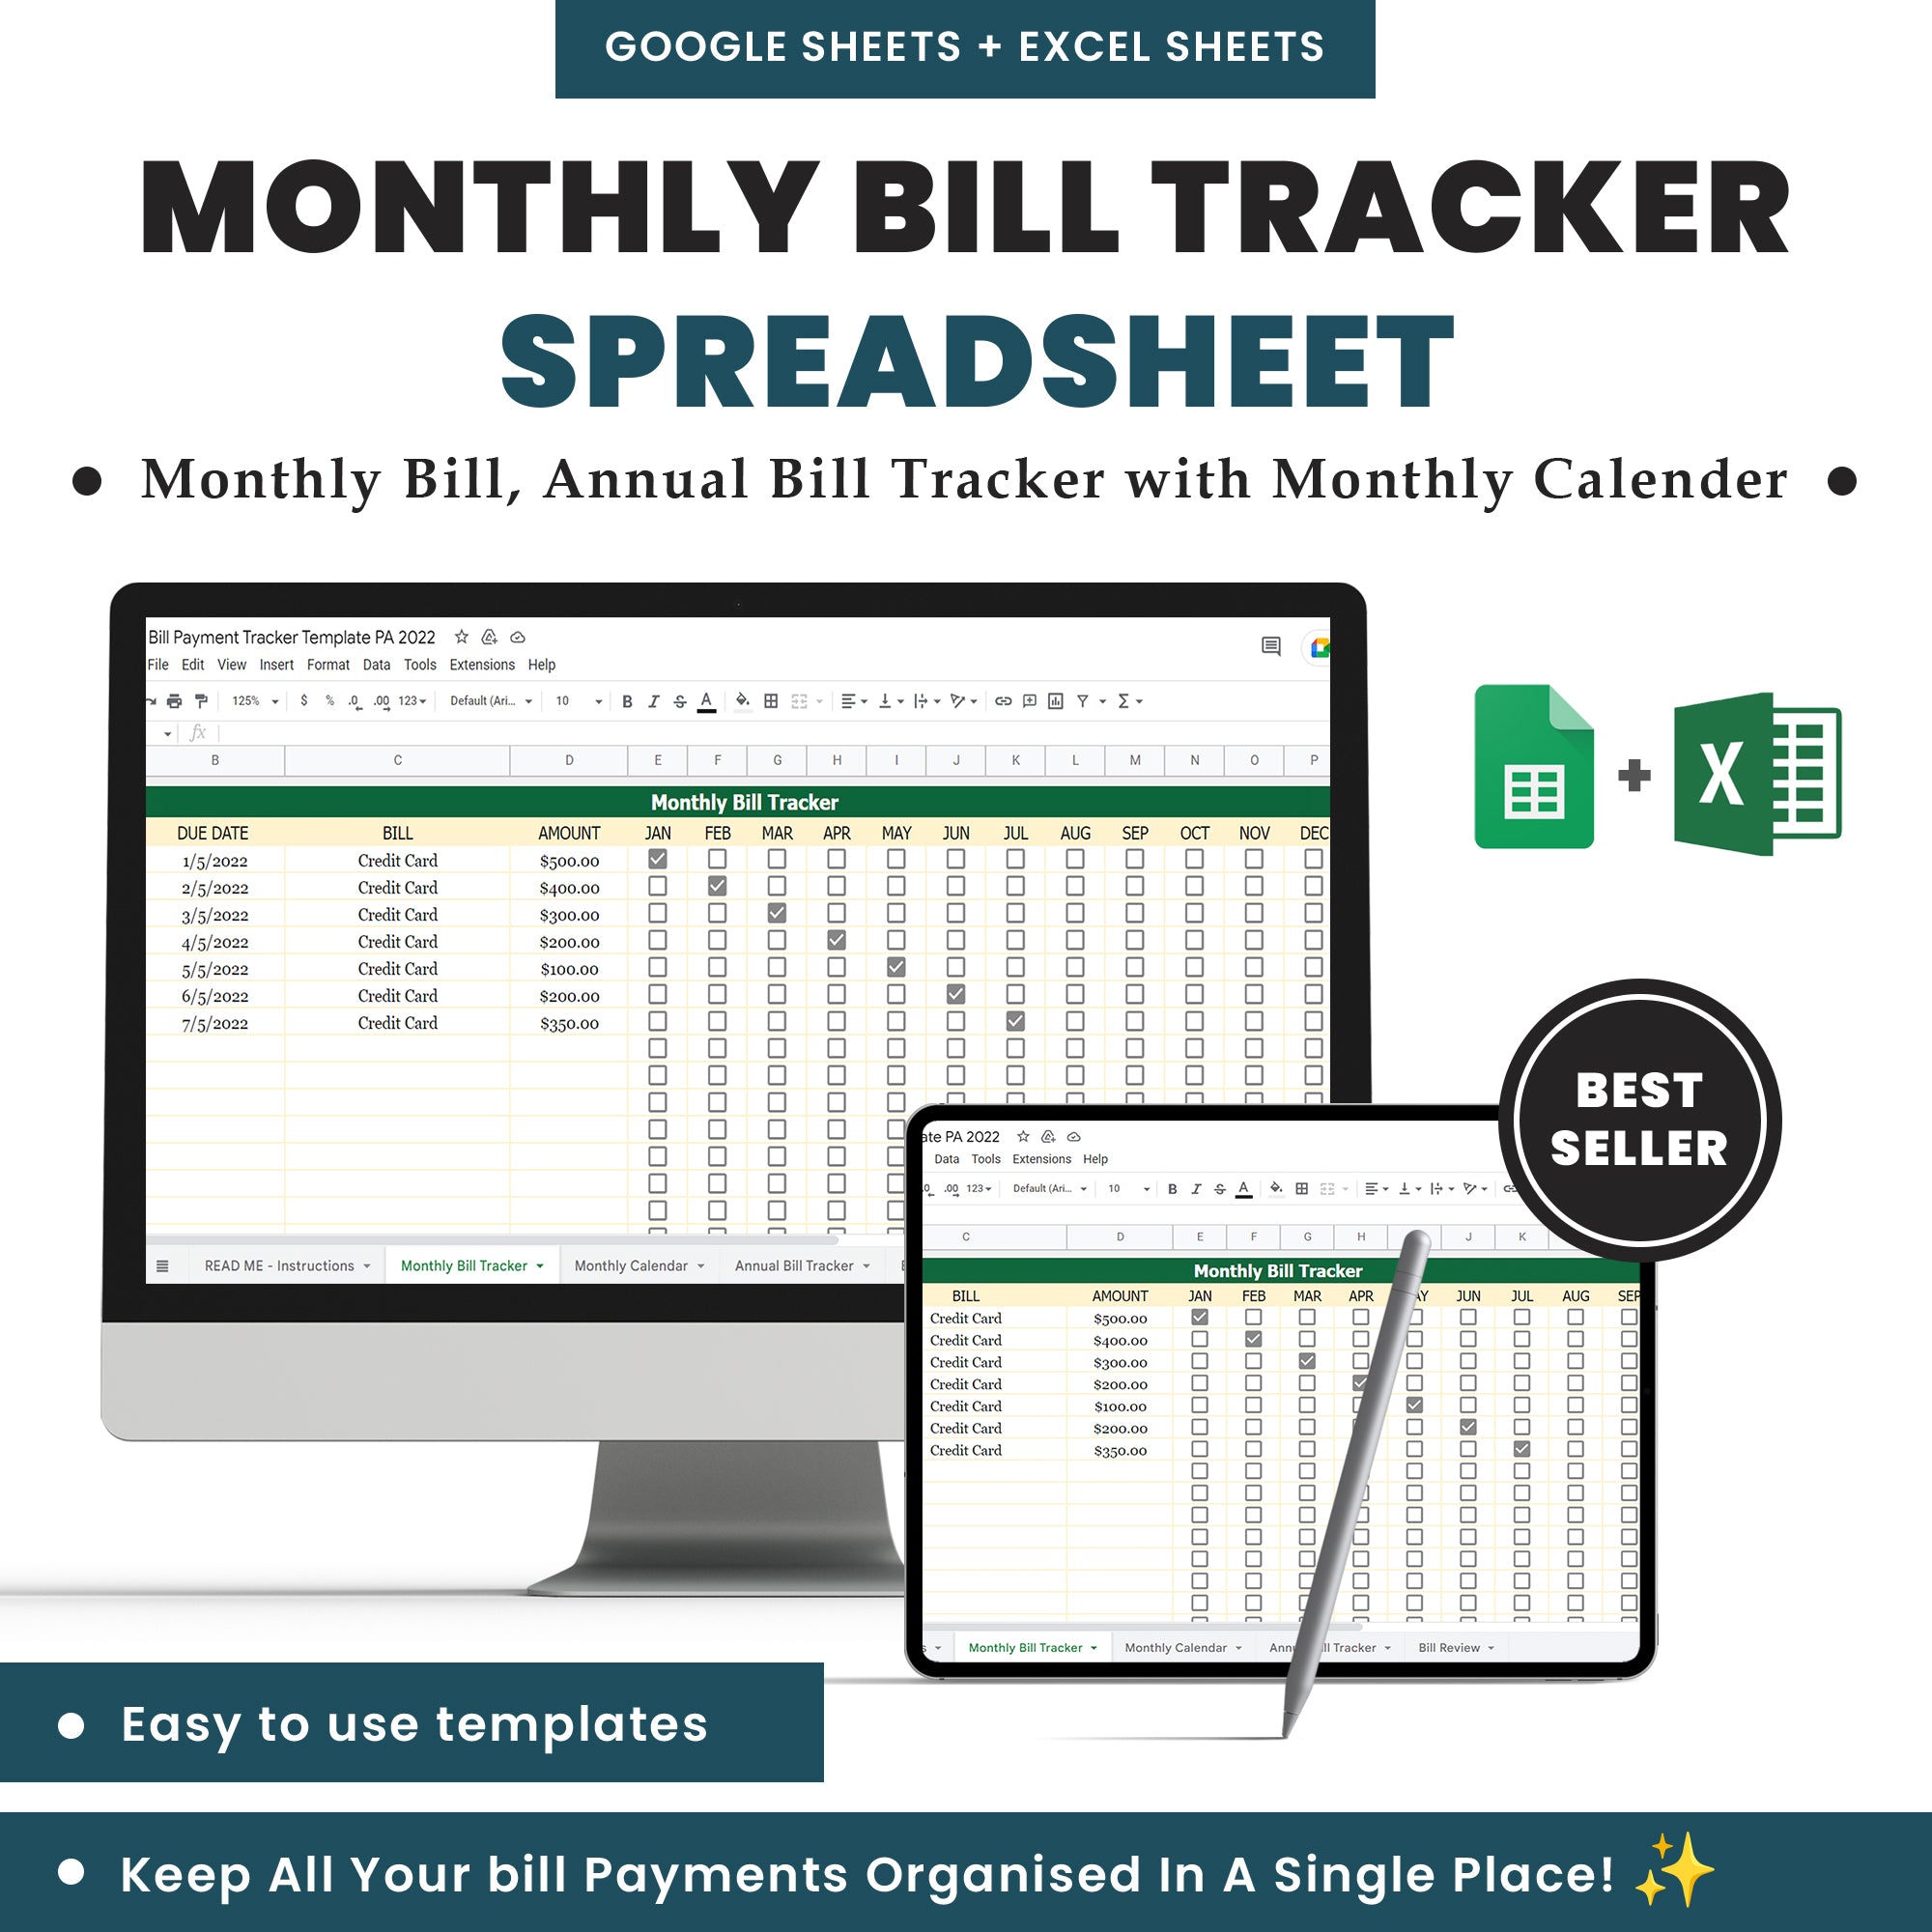 Monthly Bill Tracker Spreadsheet - Keep All Your Bills Organized In A Single Place!